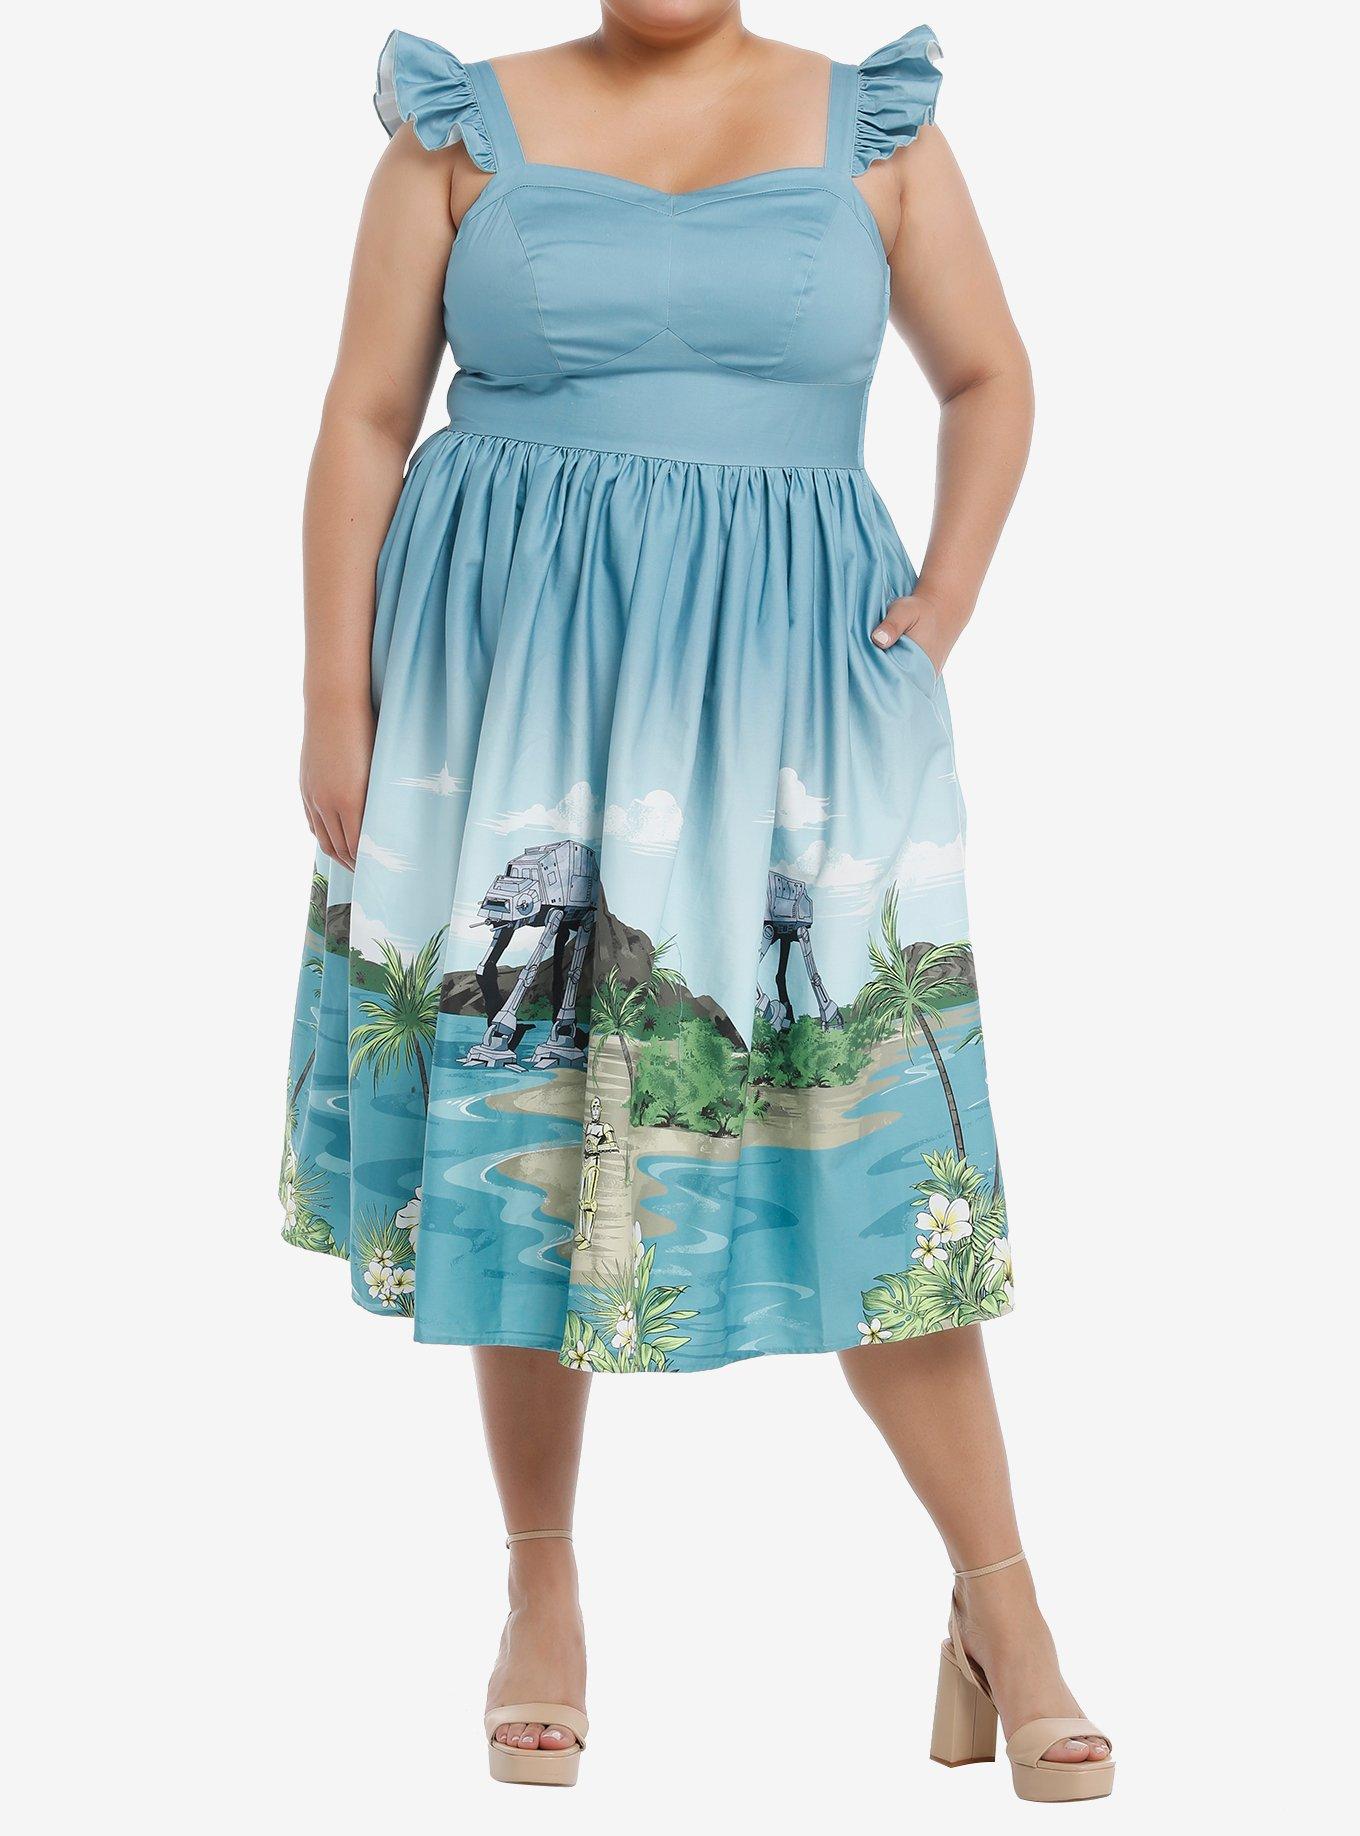 Her Universe Star Wars Droids At The Beach Tiki Dress Plus Size Her Universe Exclusive, , hi-res